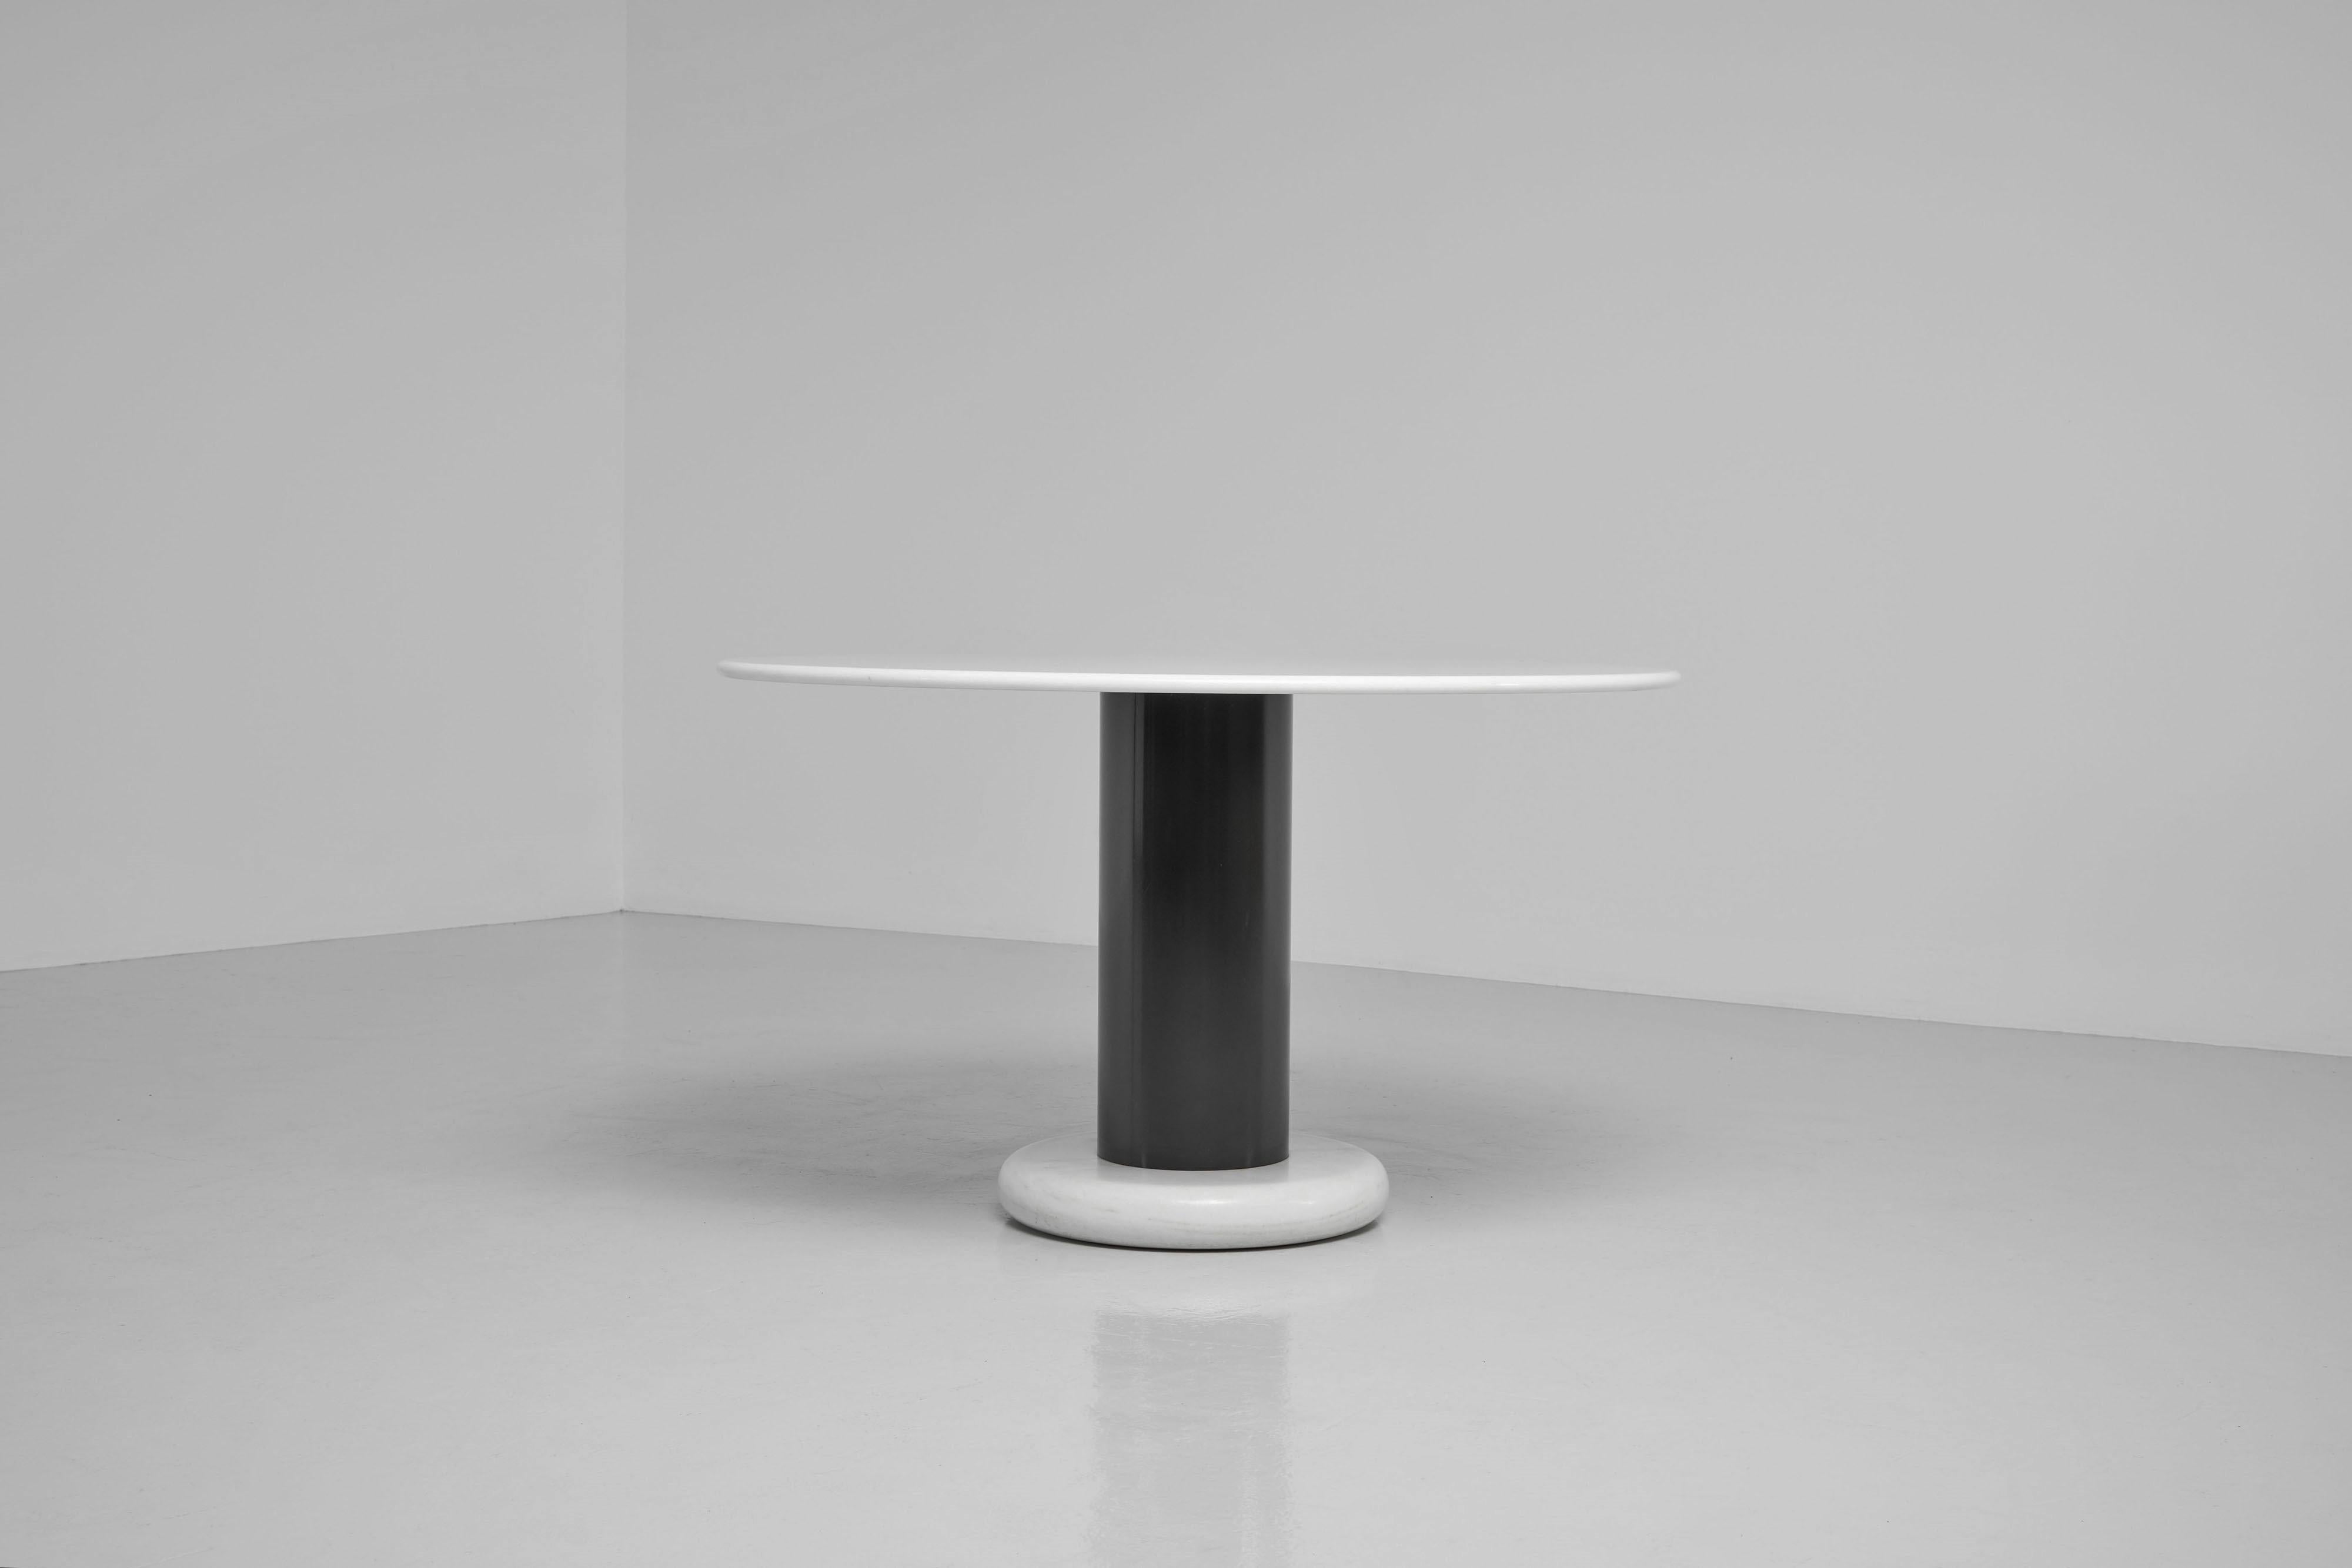 Cold-Painted Ettore Sottsass Loto dining table Poltronova Italy 1965